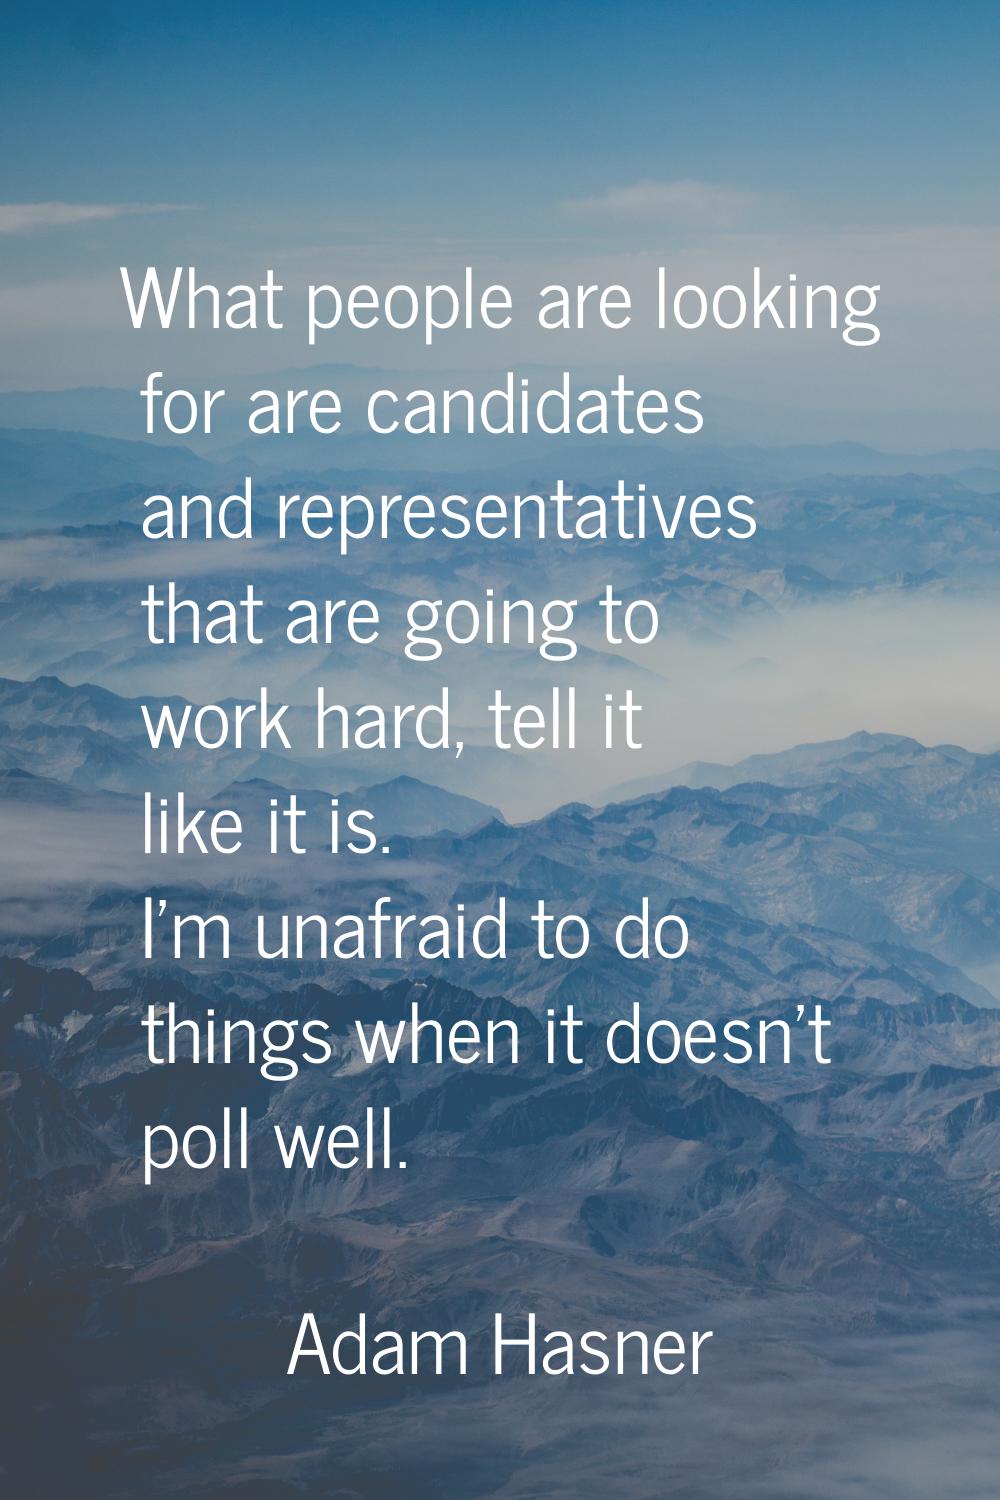 What people are looking for are candidates and representatives that are going to work hard, tell it